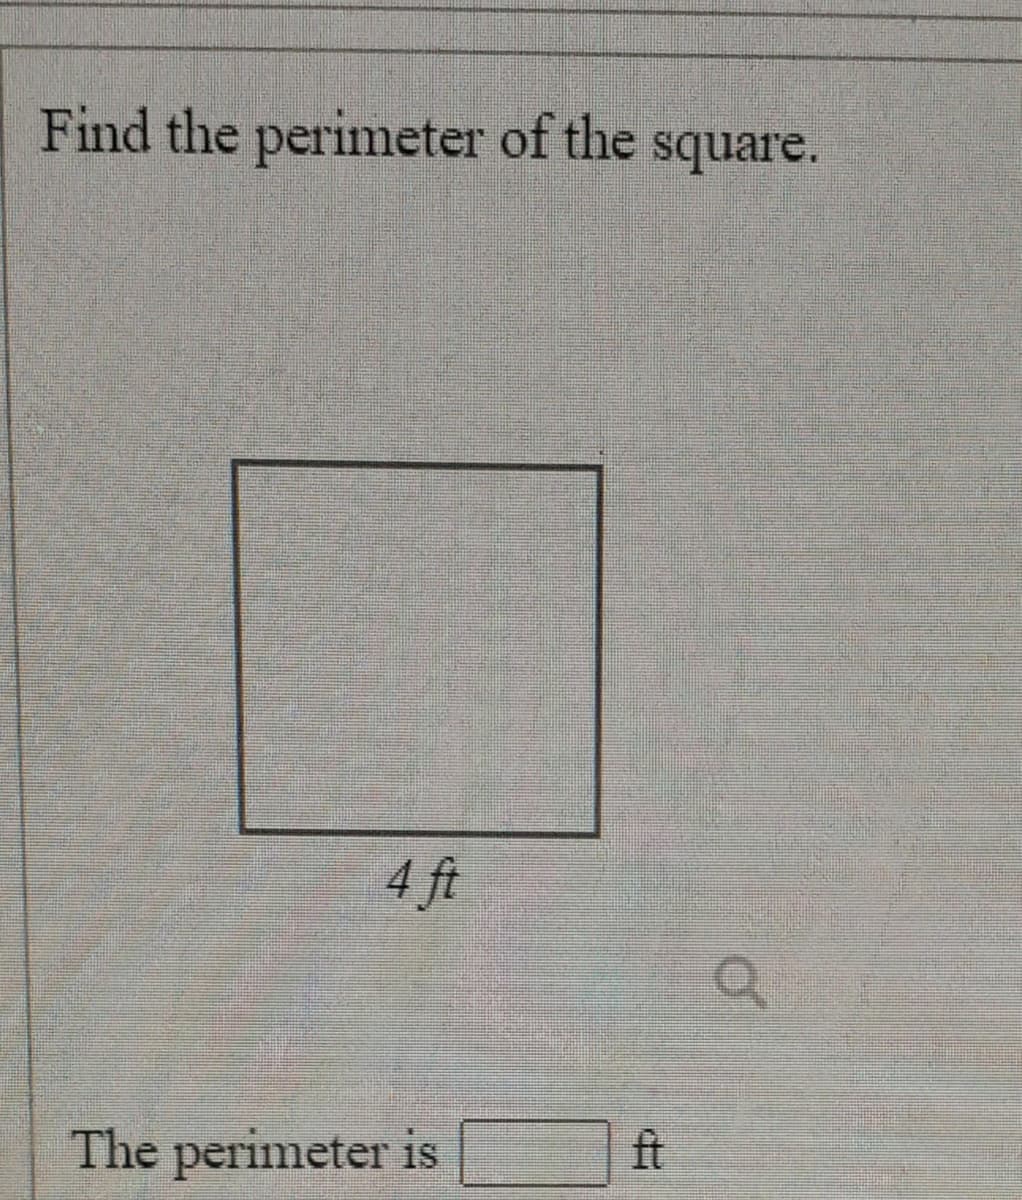 Find the perimeter of the square.
4 ft
ft
The perimeter is
